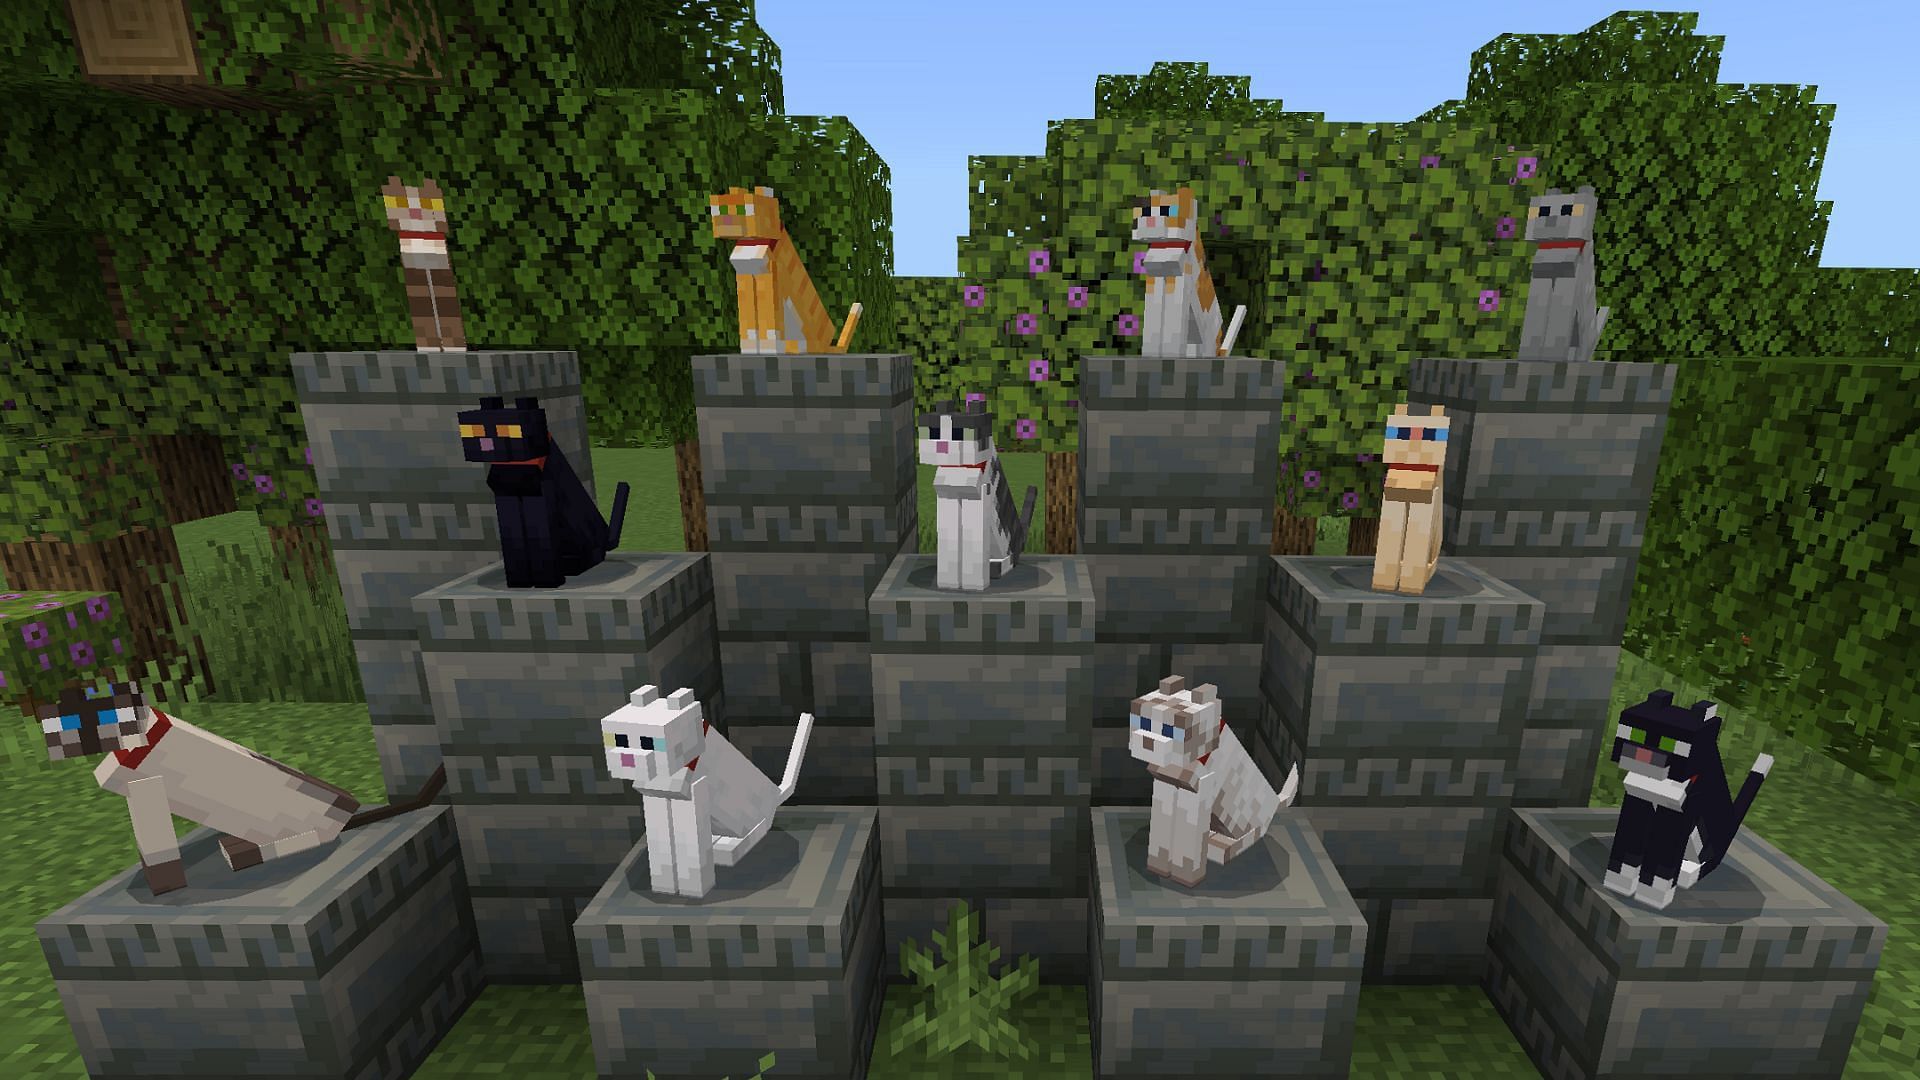 Tamed wolves and cats could be made more immersive with just small tweaks to their behavior (Image via Mojang)